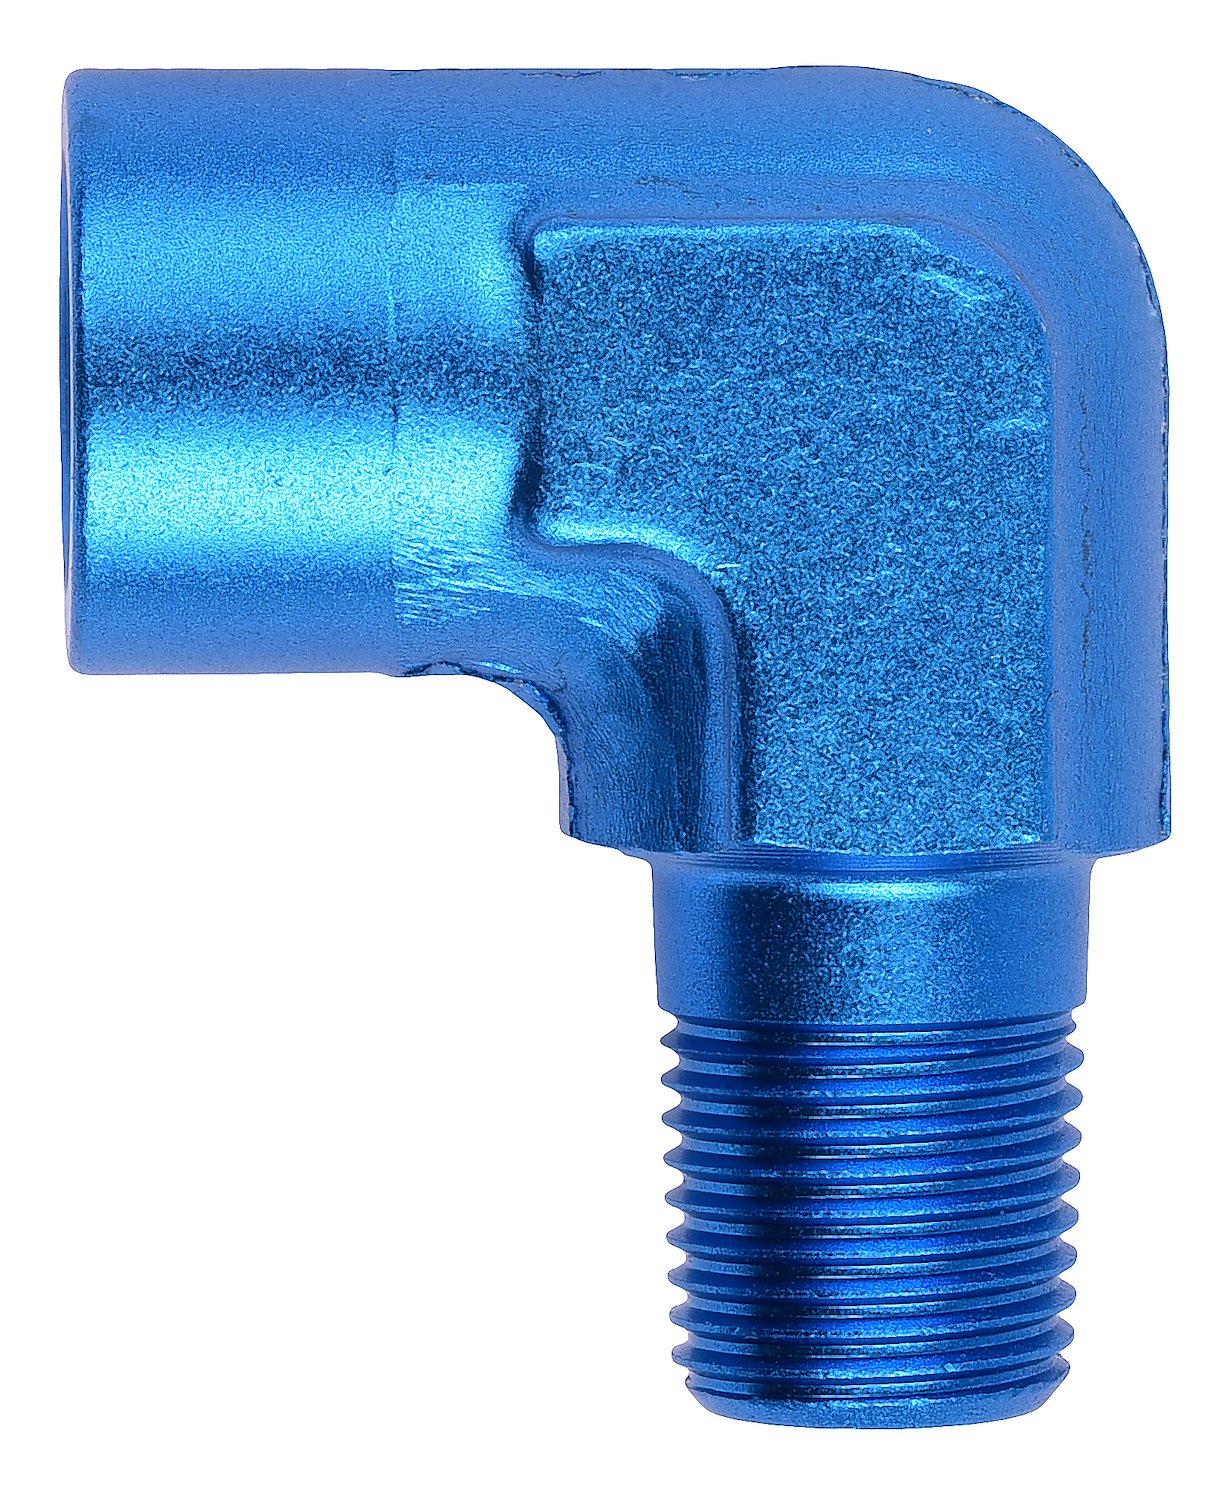 NPT to NPT Adapter Fitting, 90 degree [1/8 in. NPT Male to 1/8 in. NPT Female, Blue]